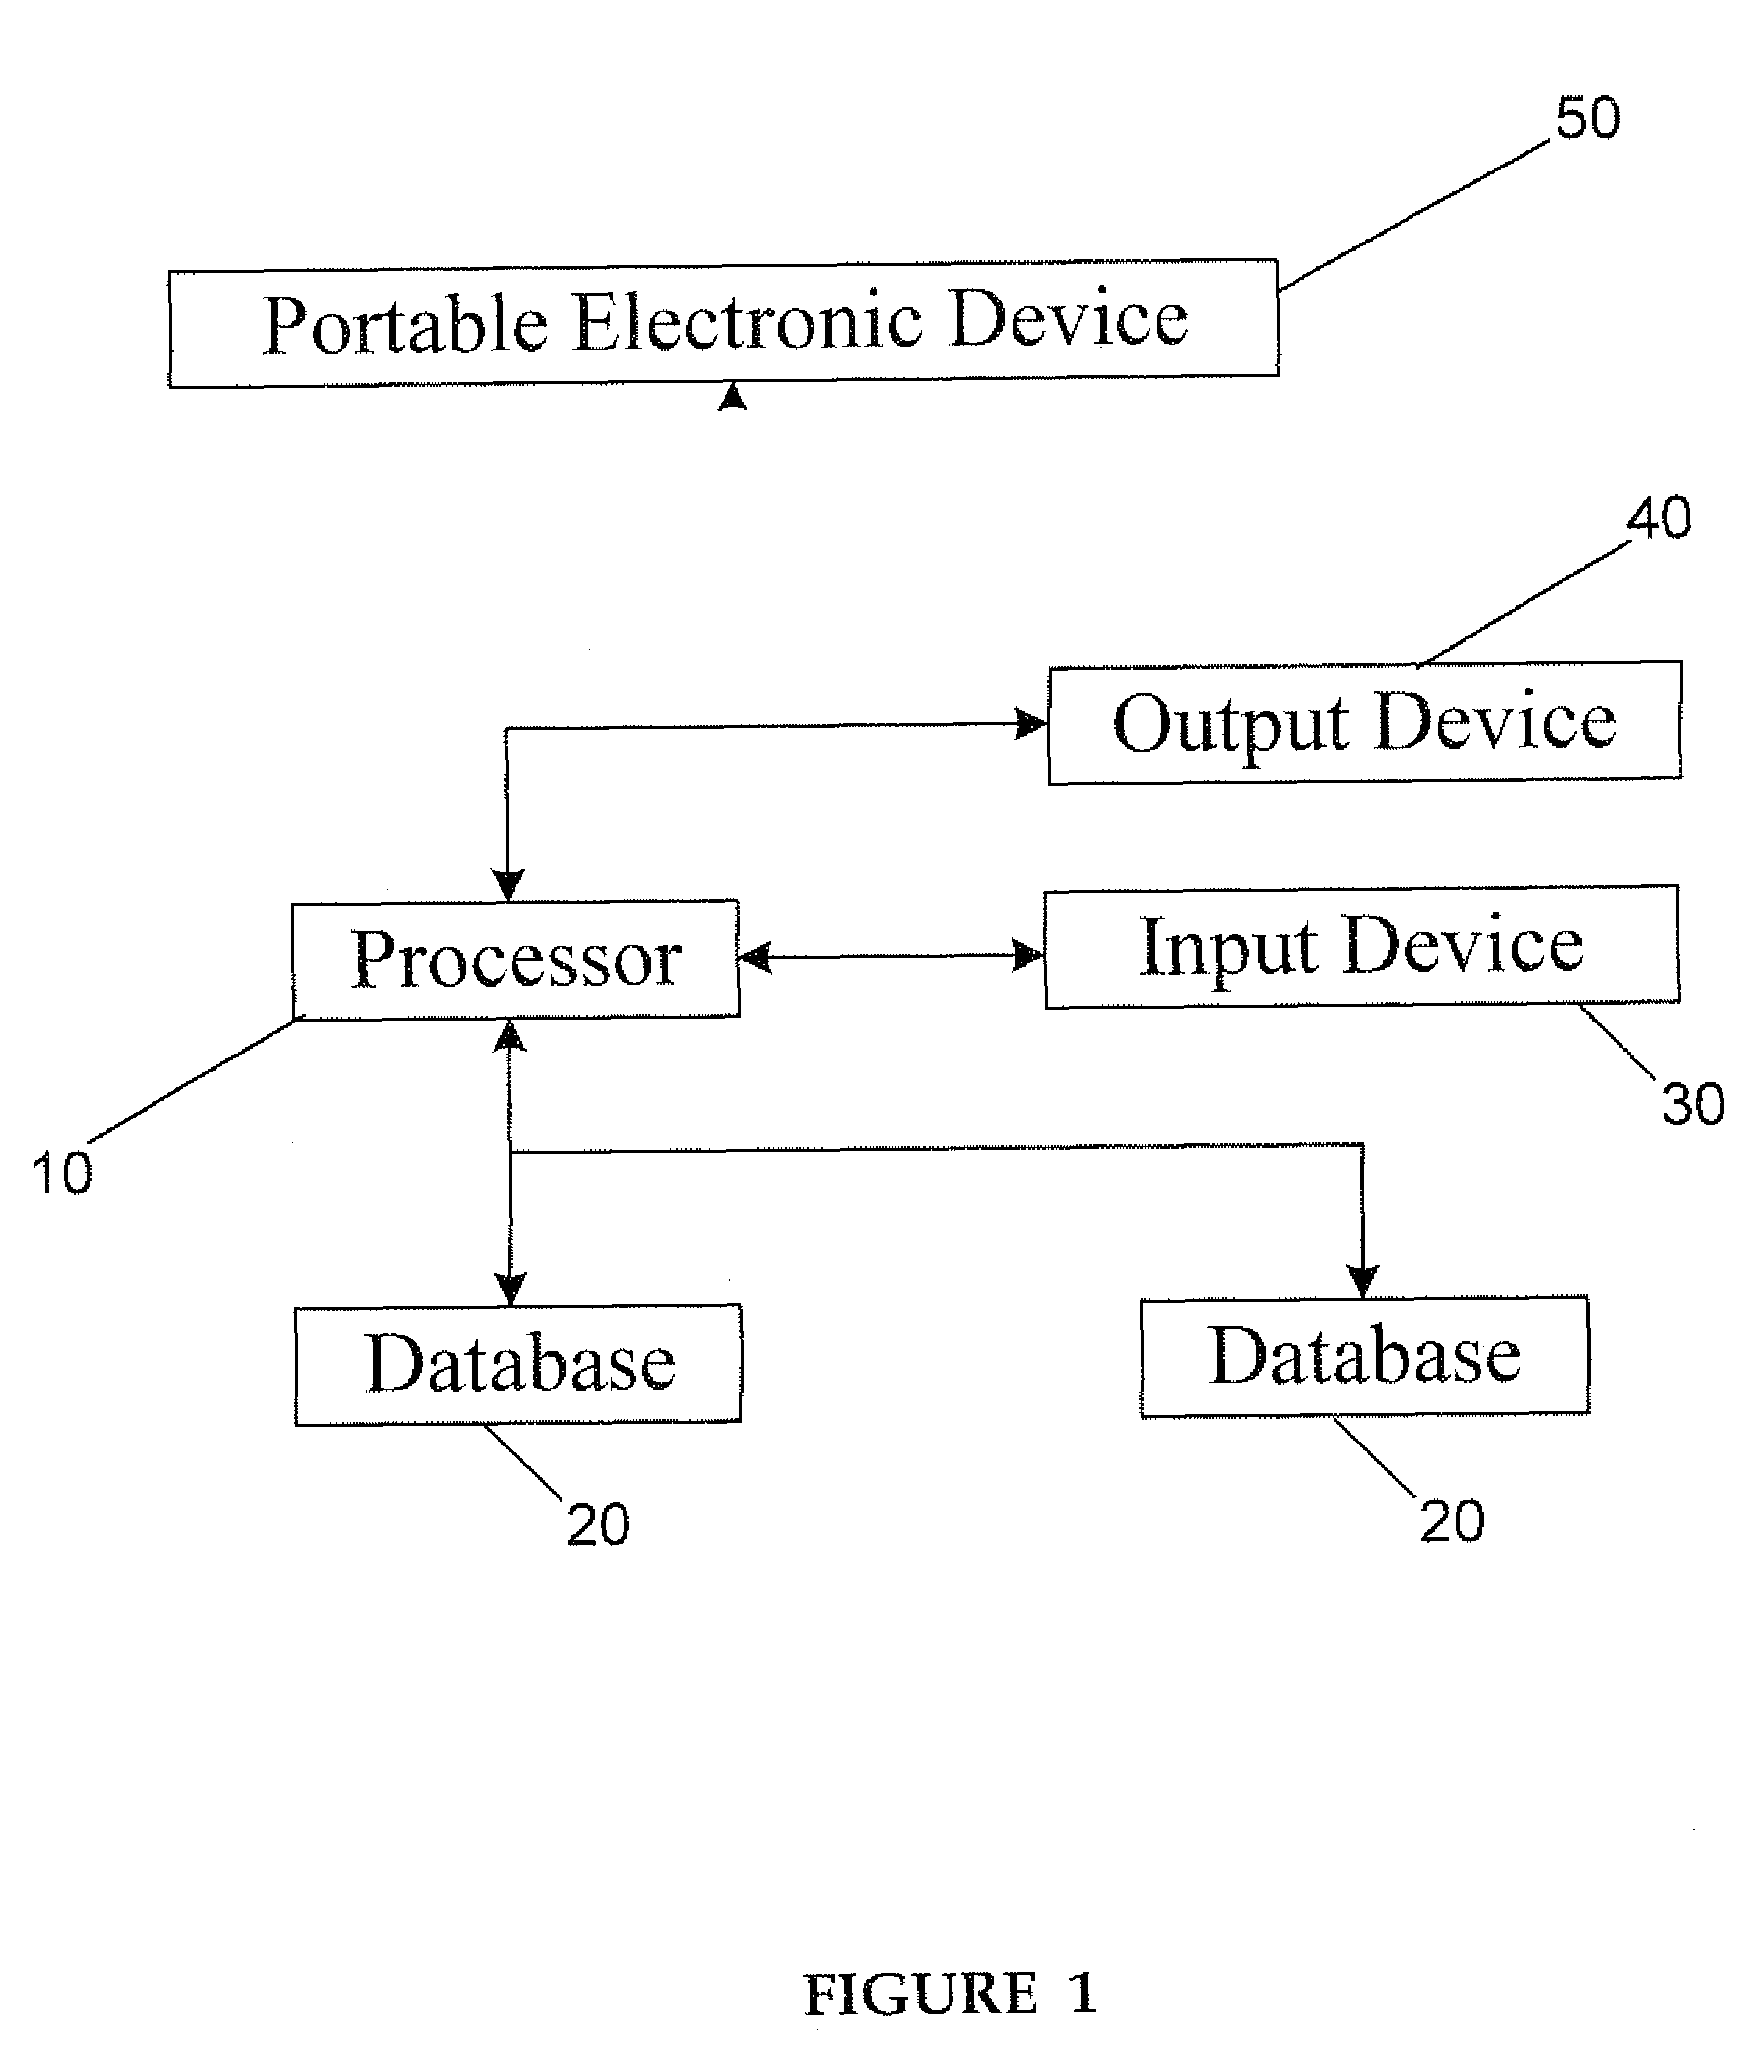 Operation and method for prediction and management of the validity of subject reported data